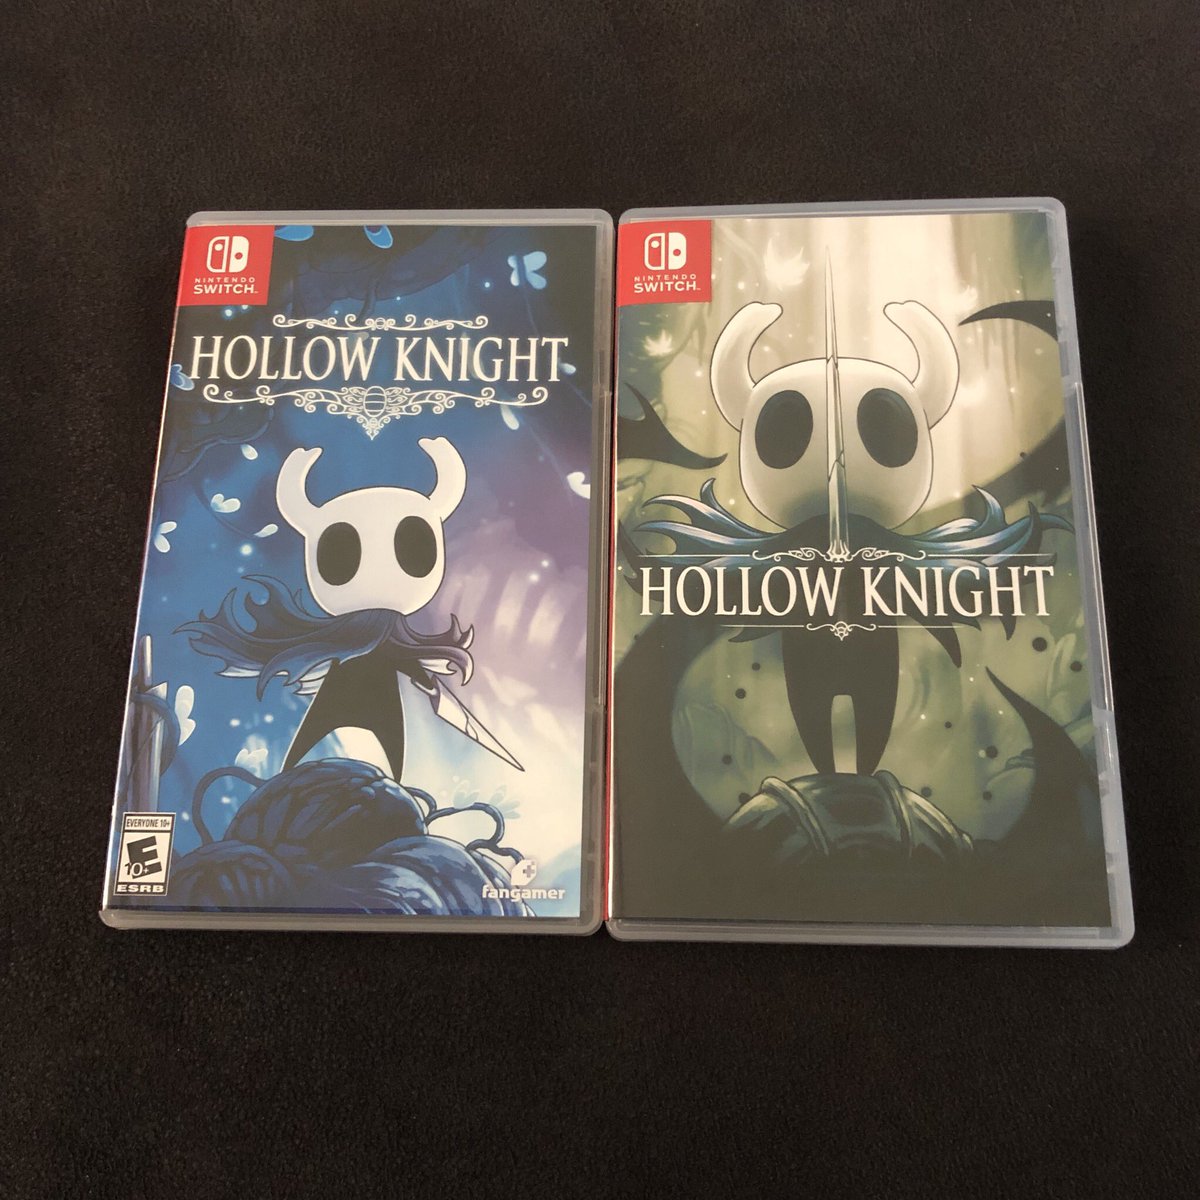 Hollow X: physical) <3 Knight you if reversible! got The https://t.co/UbkxGsxreA\